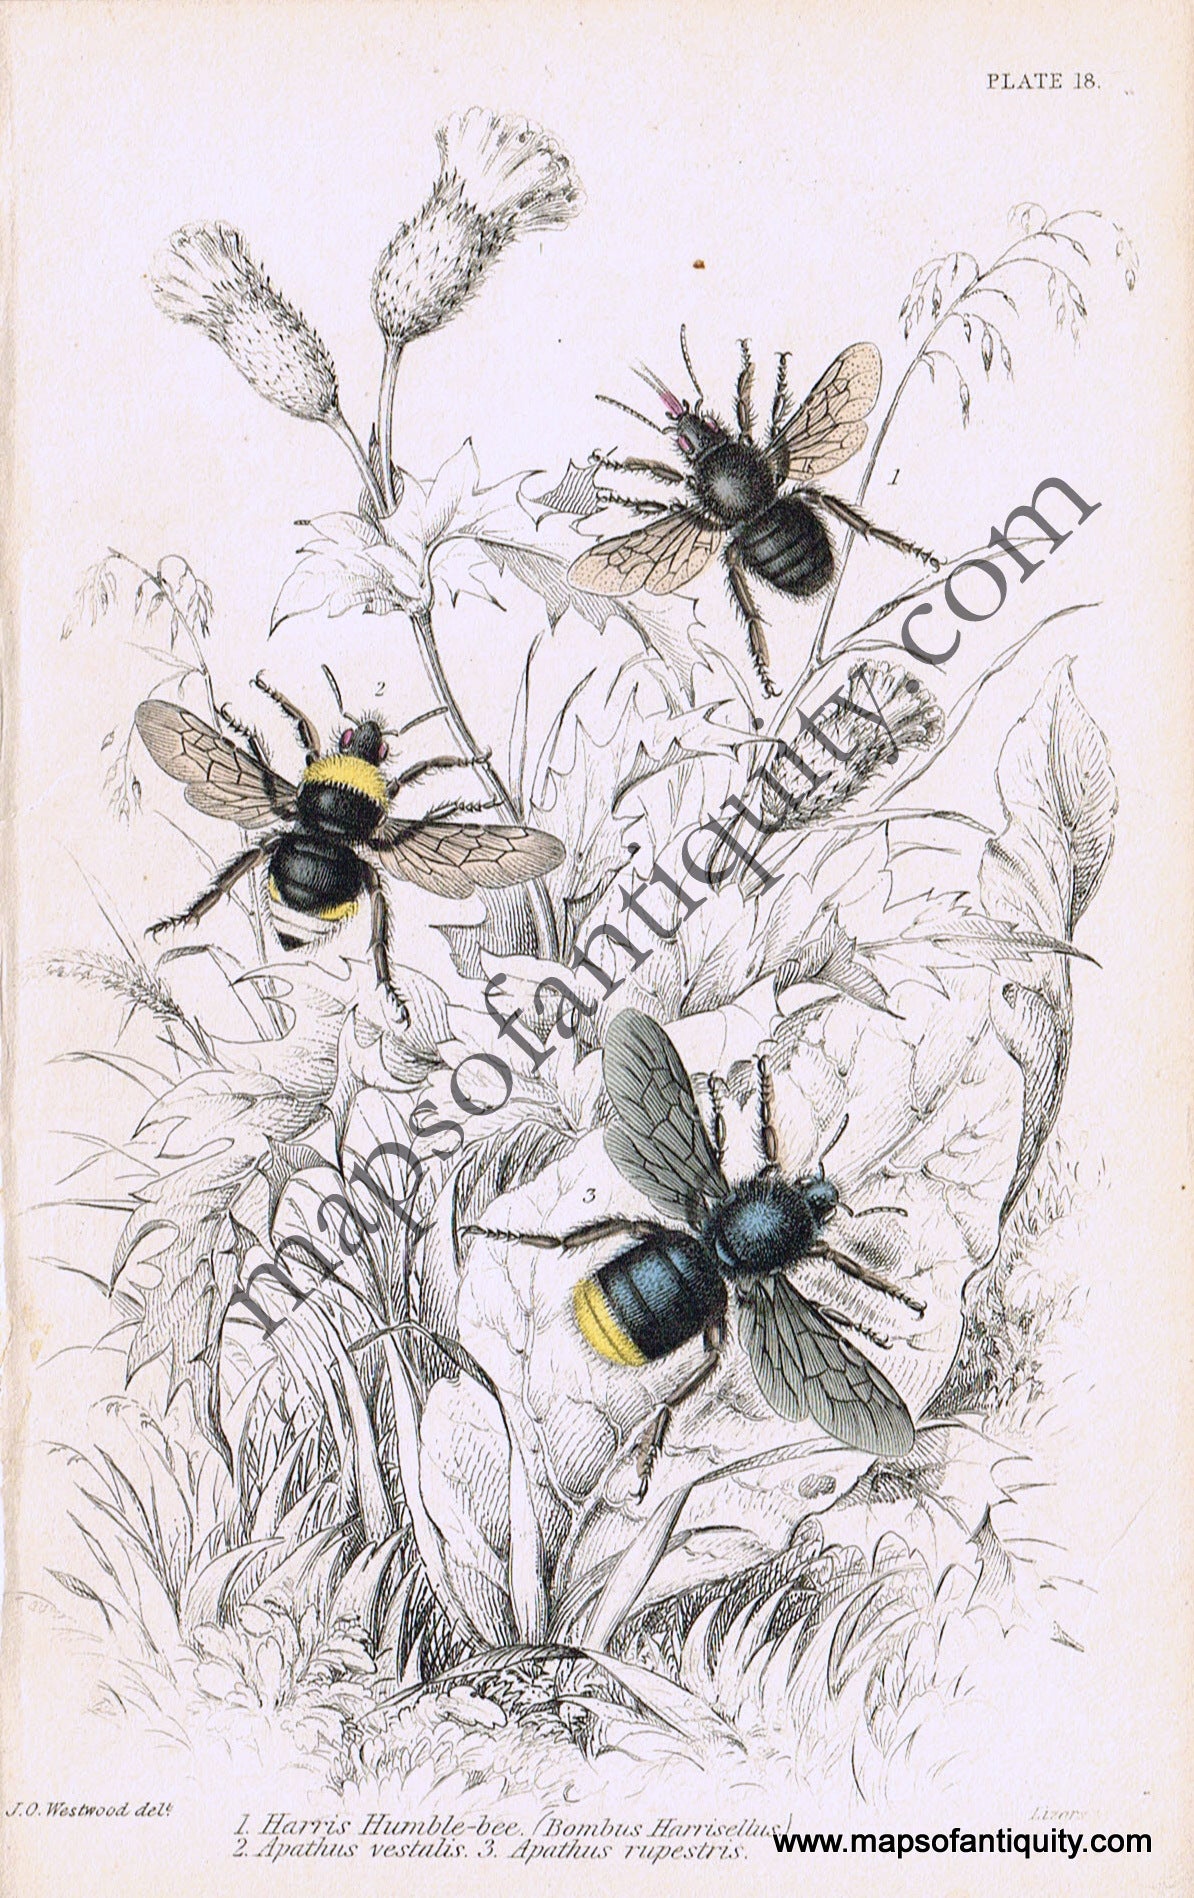 Antique-Hand-Colored-Print-Bombus-harrisellus-Apathus-vestalis-&-Apathis-rupestris-Antique-Prints-Natural-History-Insects-1840-Duncan-Maps-Of-Antiquity